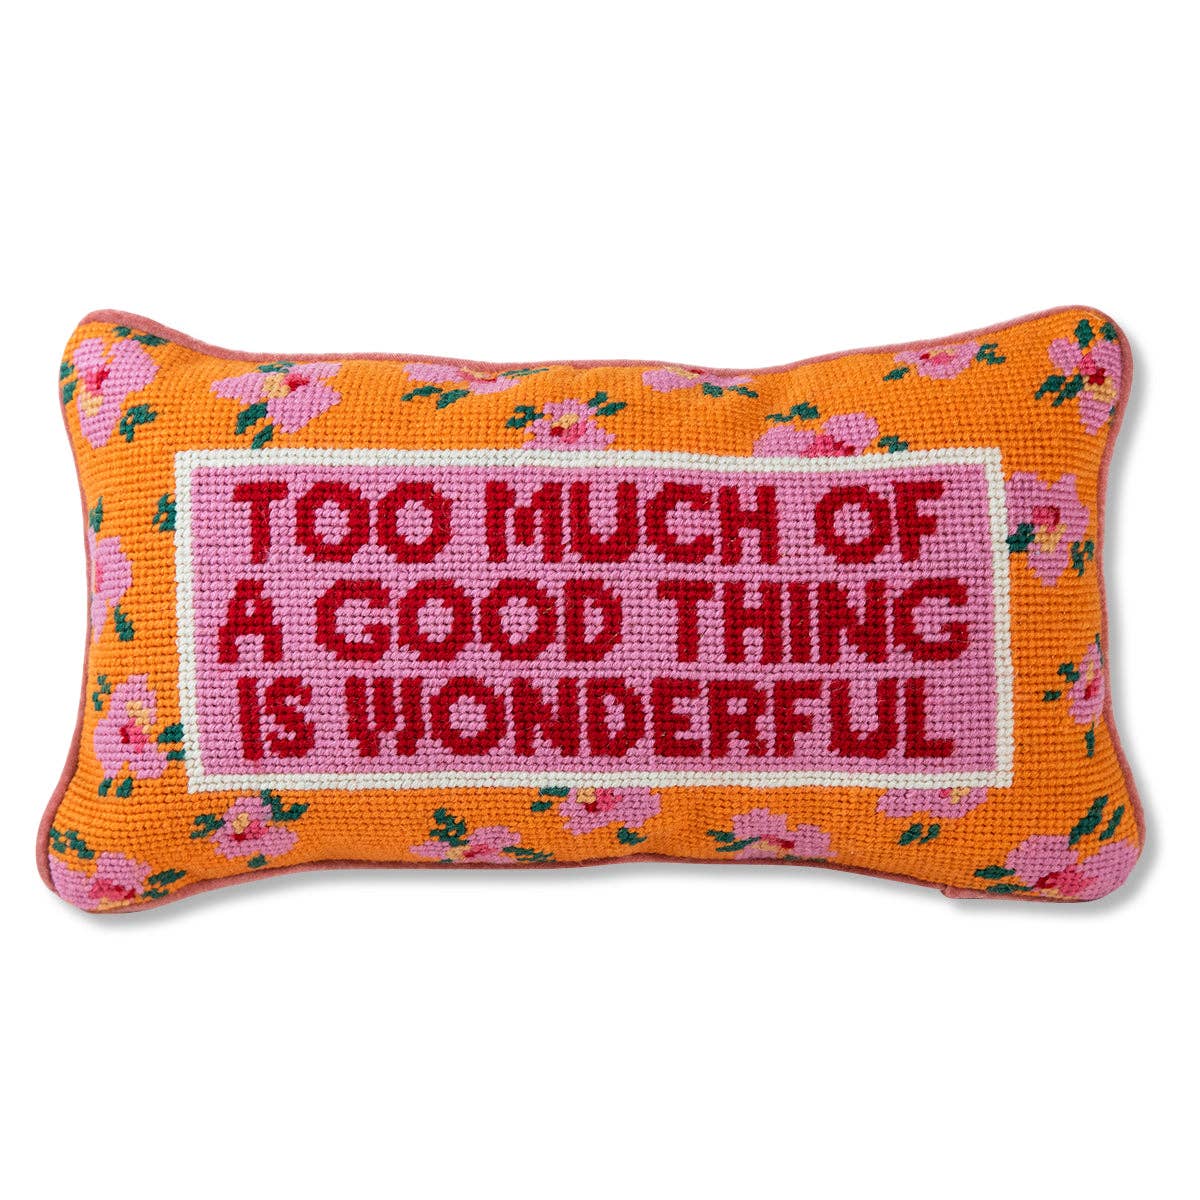 Too Much of a Good Thing Needlepoint Pillow - Curated Home Decor